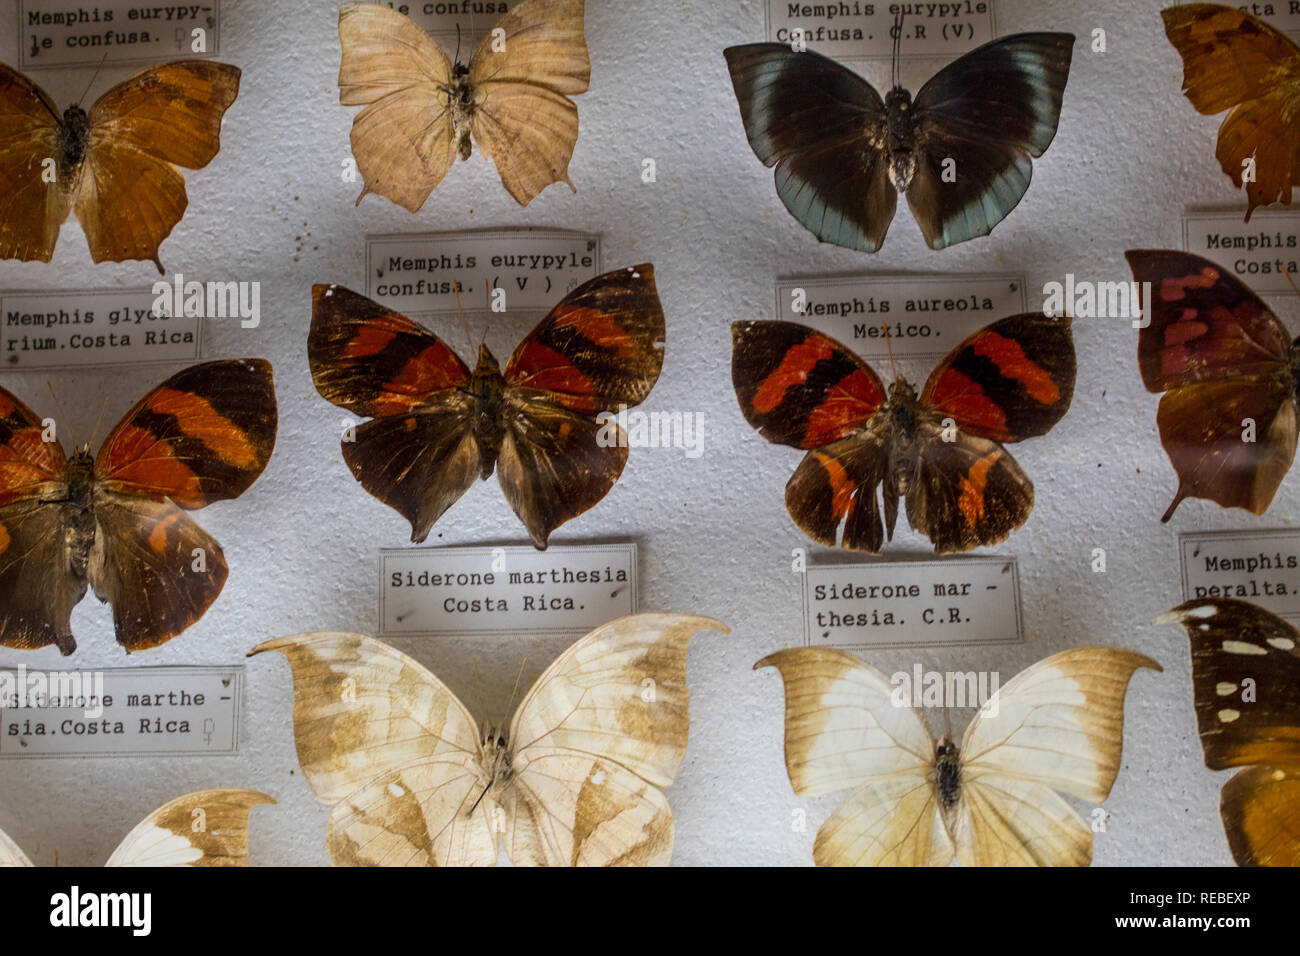 An entomological collection of beautiful pinned butterflies in a Natural History Museum. With etiquettes for identification. Stock Photo